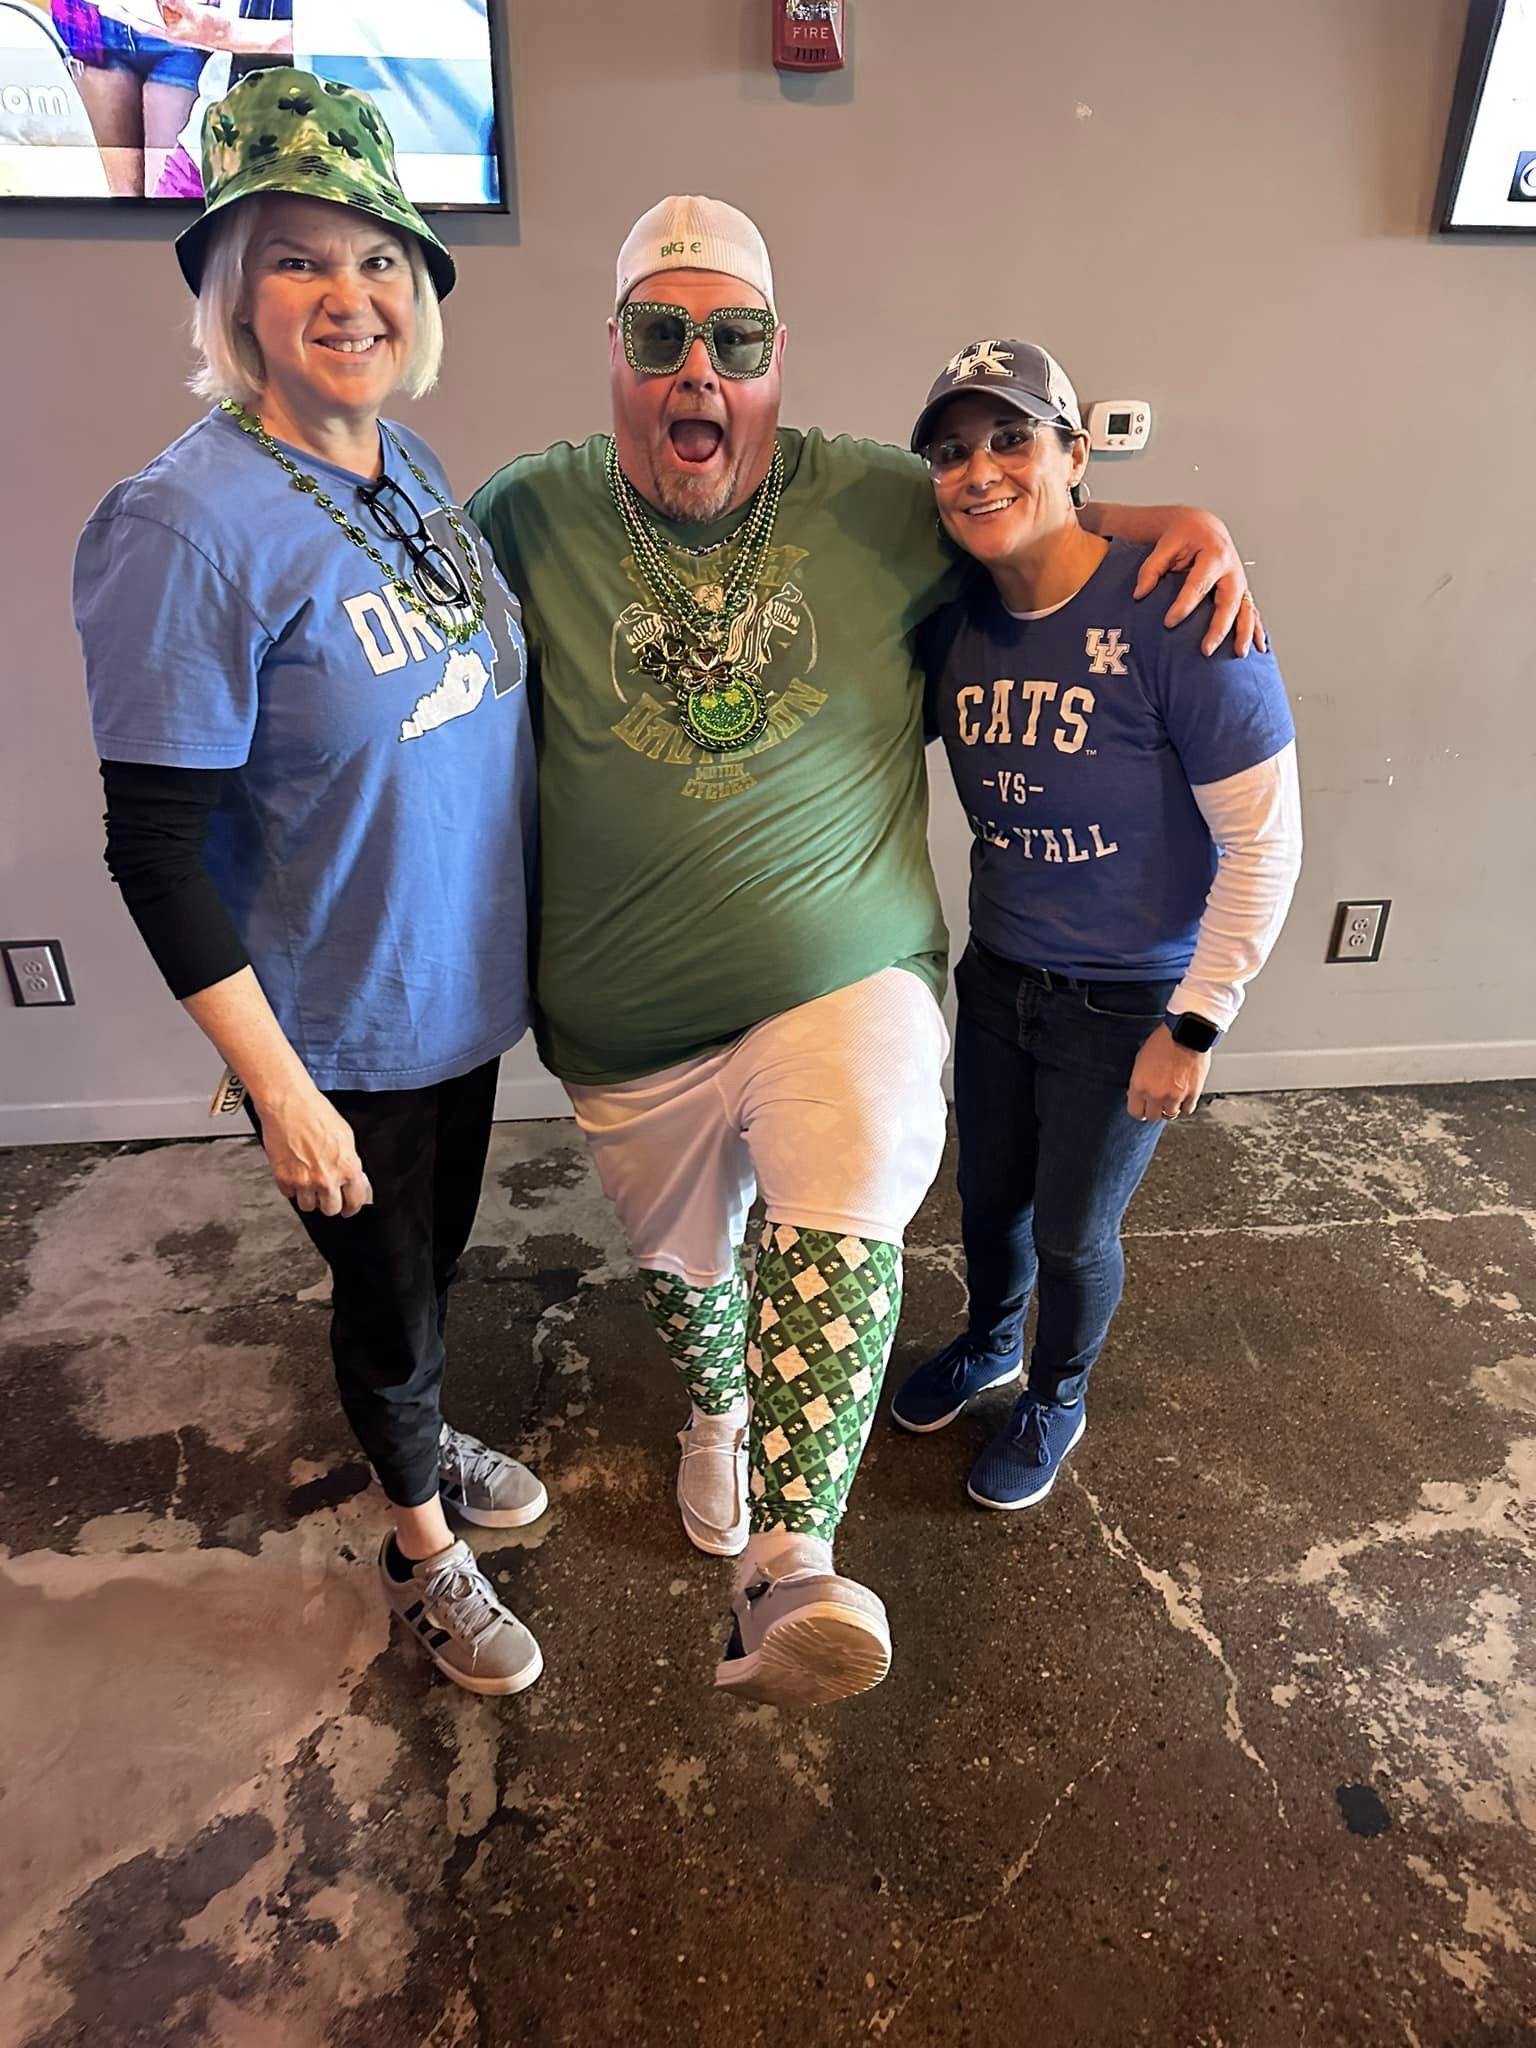 Three people smiling and dressed for St. Patty's Day